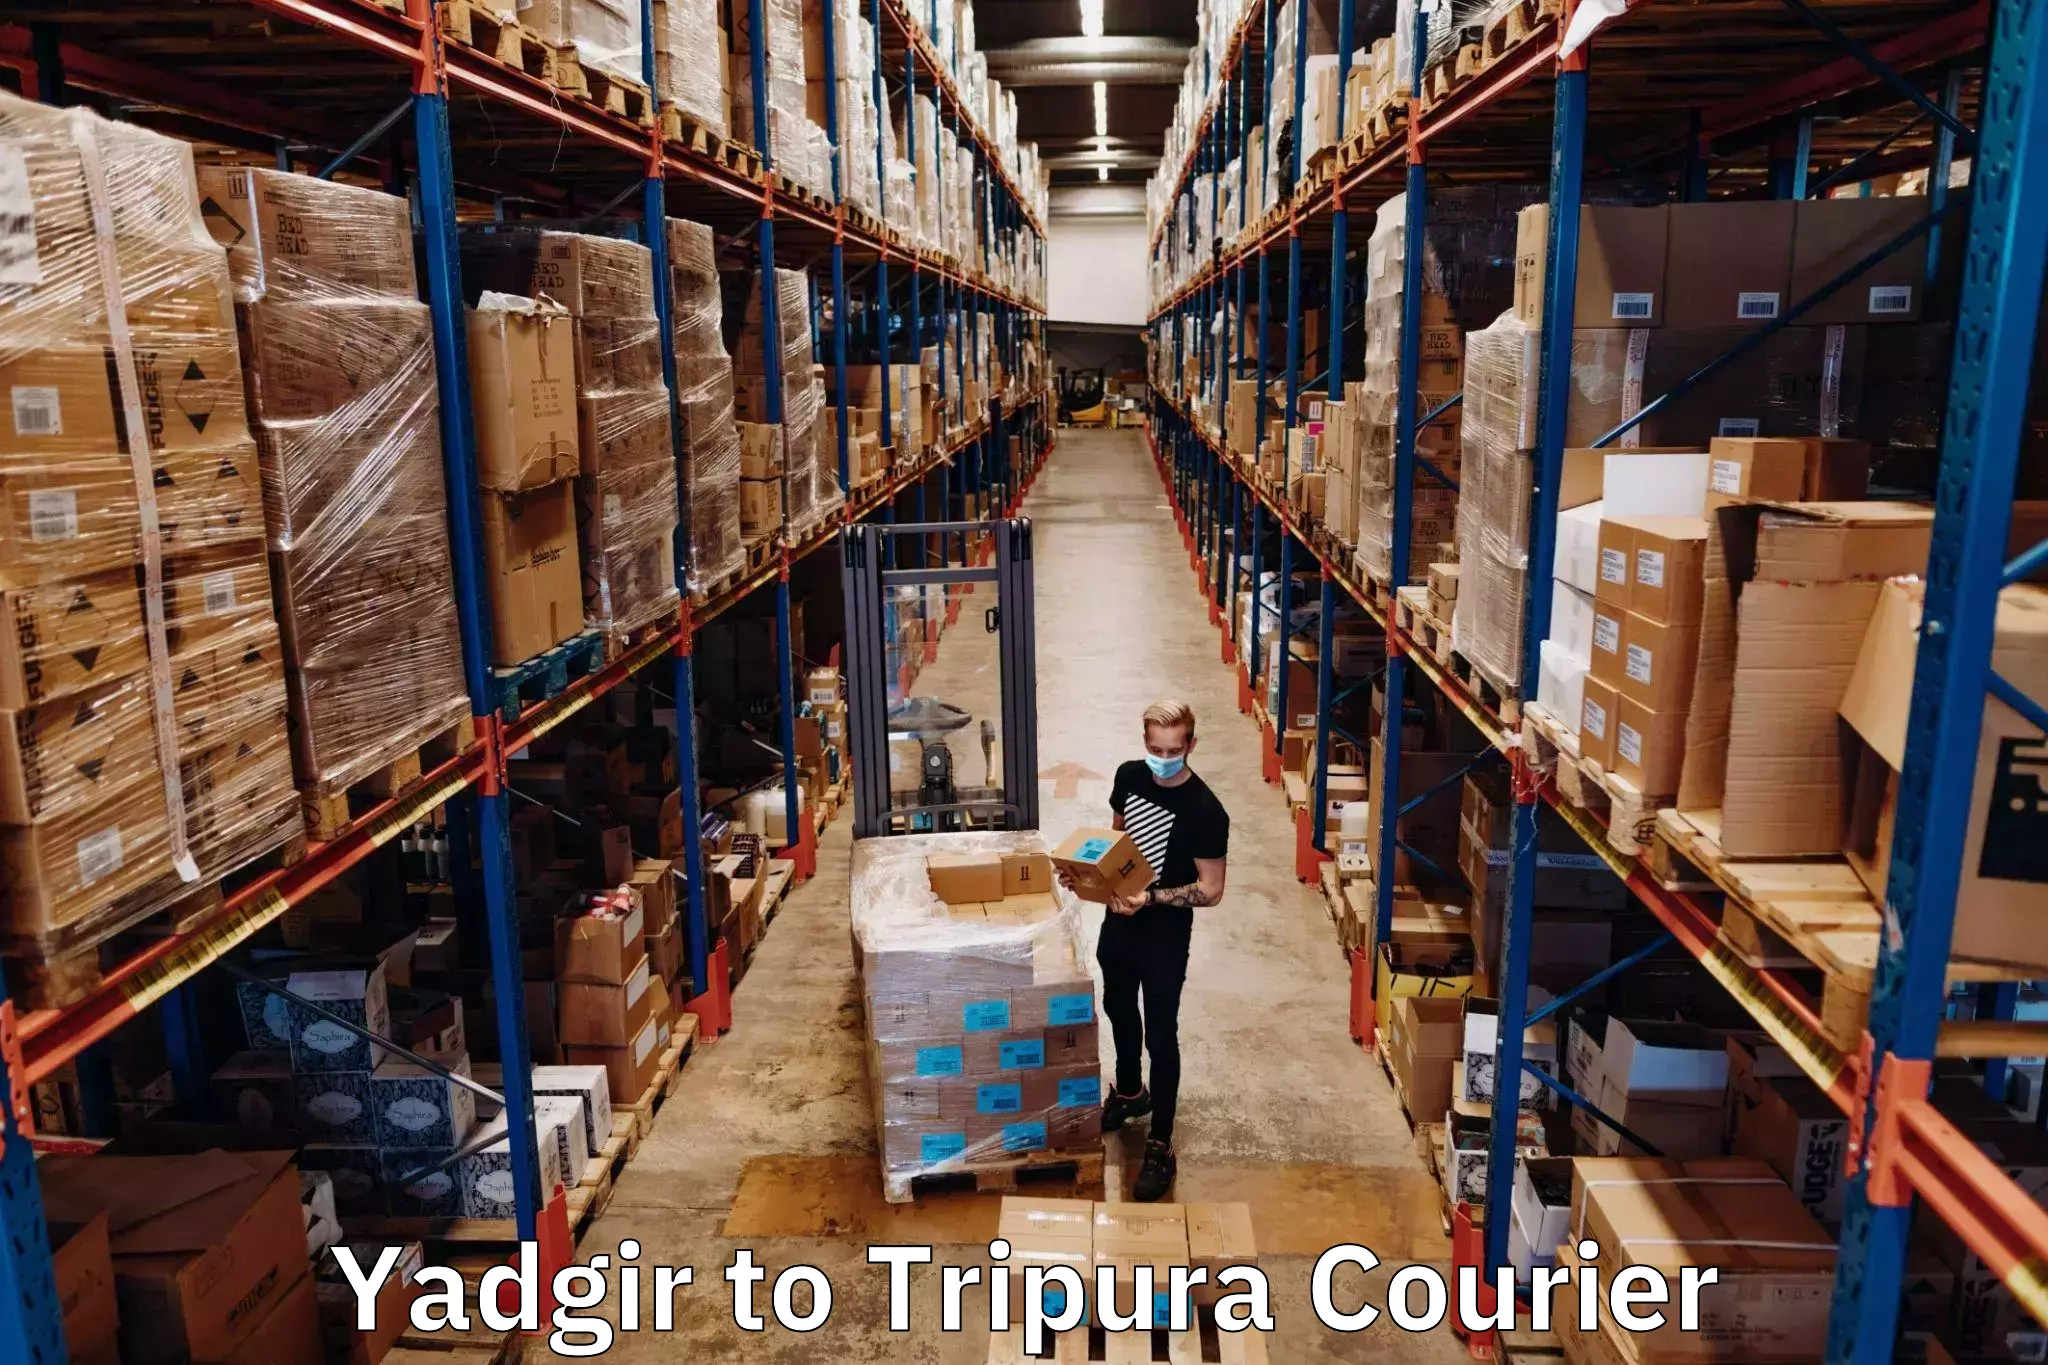 Express delivery solutions Yadgir to Udaipur Tripura